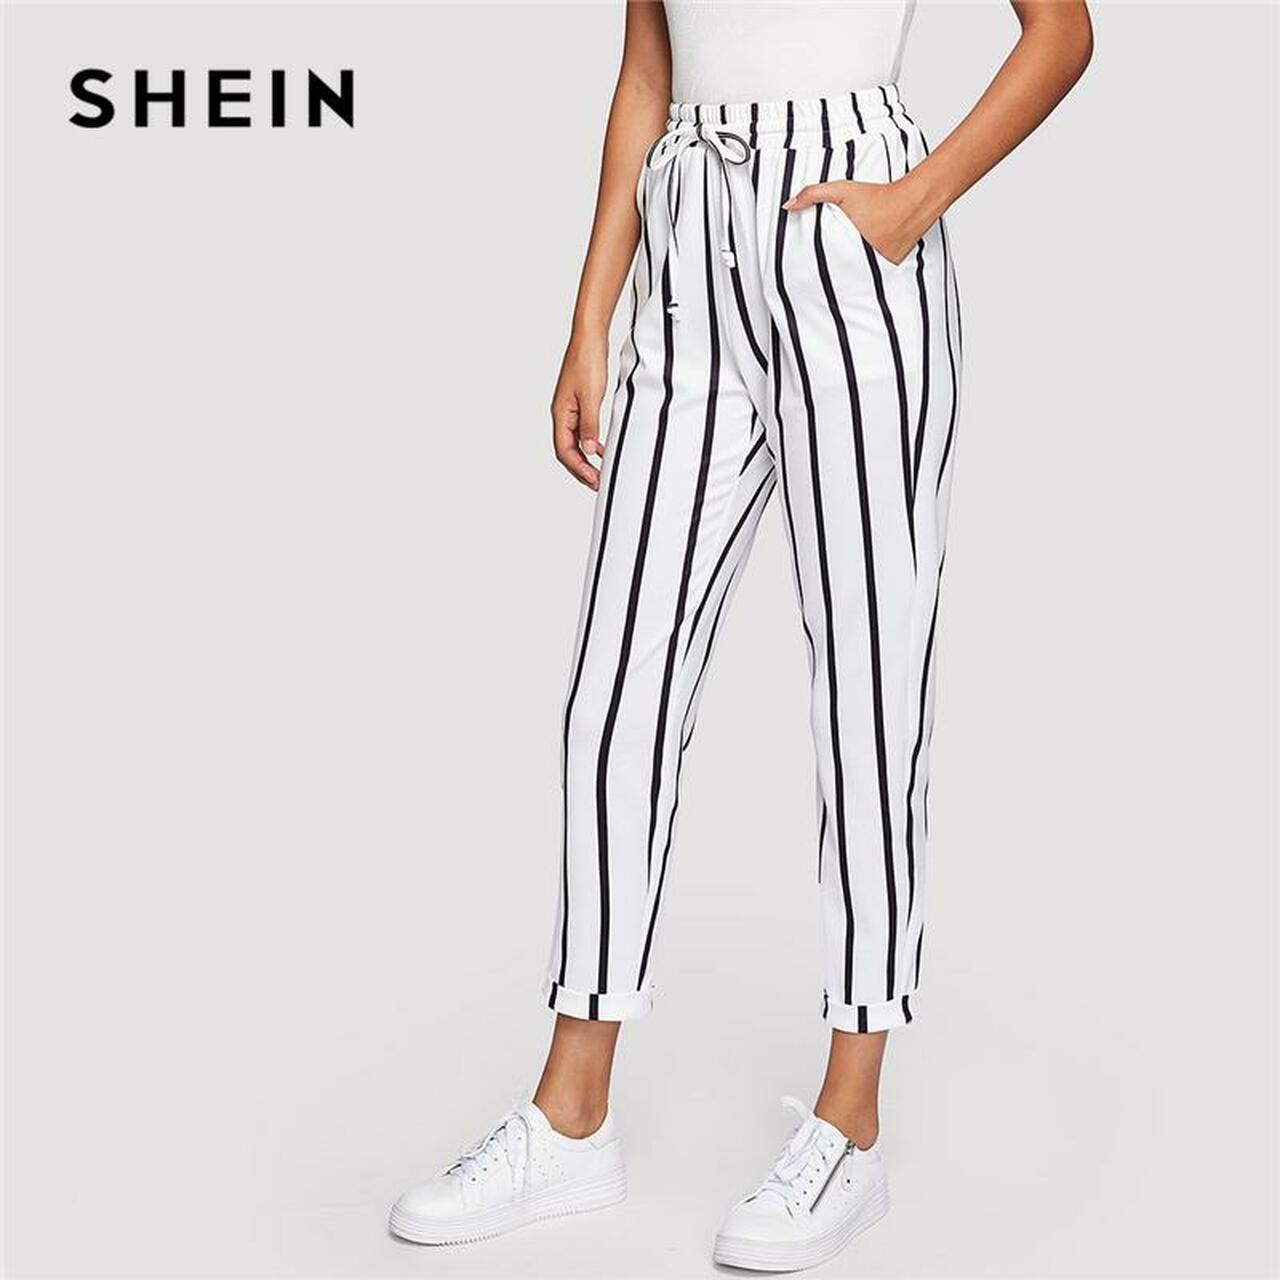 SHEIN Women's Black and White Trousers | Depop